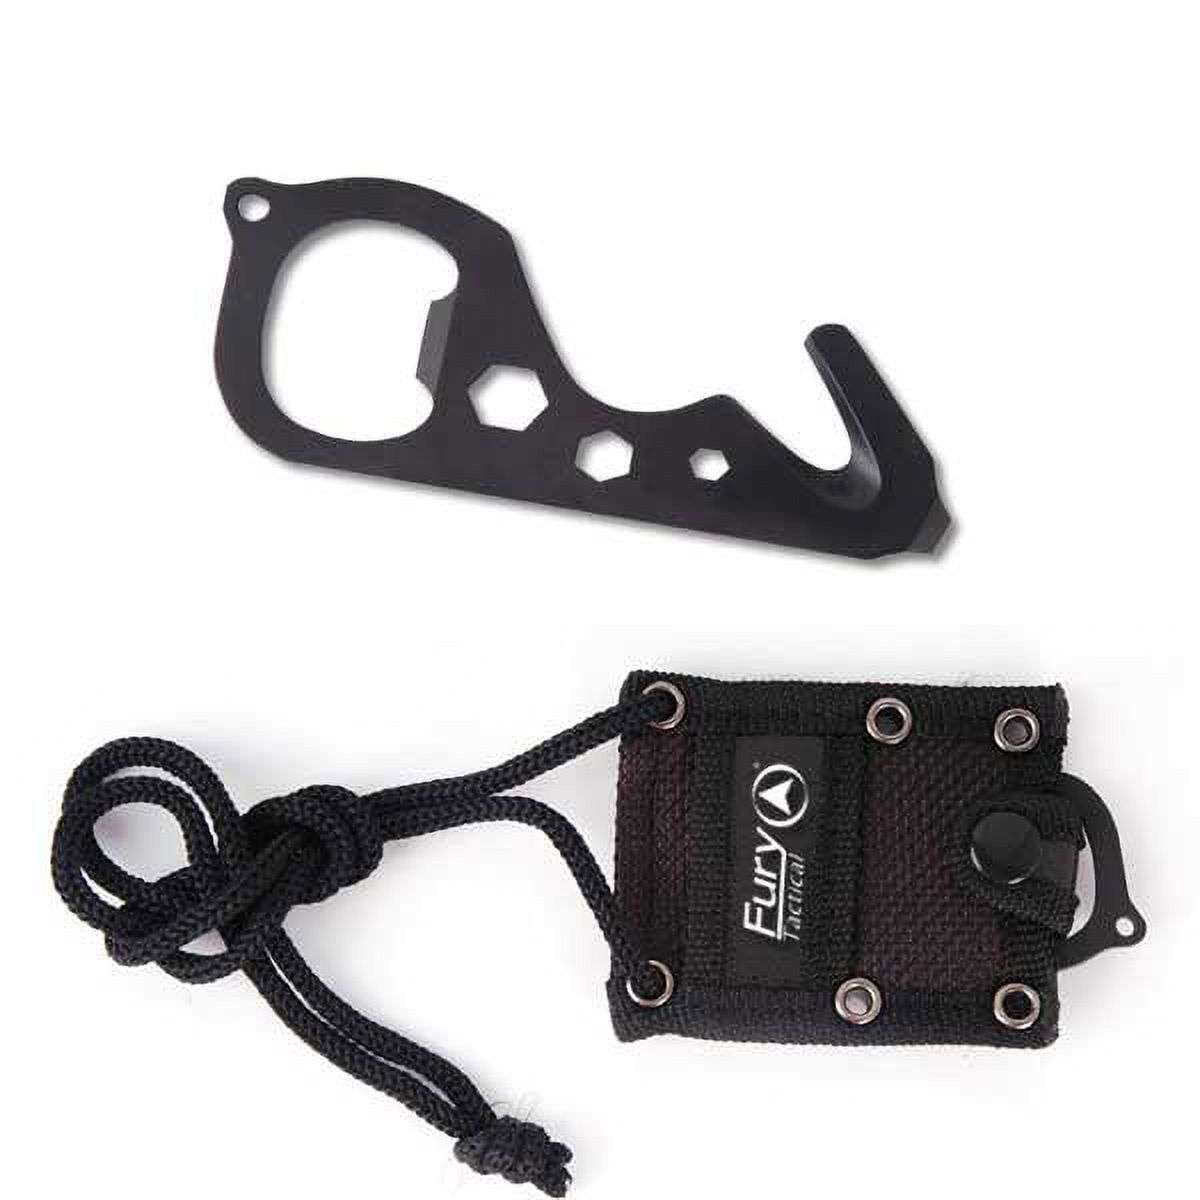 Fury Liberator Seat Belt Cutter and Bottle Opener, Rescue Hook Emergency Tool, Black - image 2 of 2